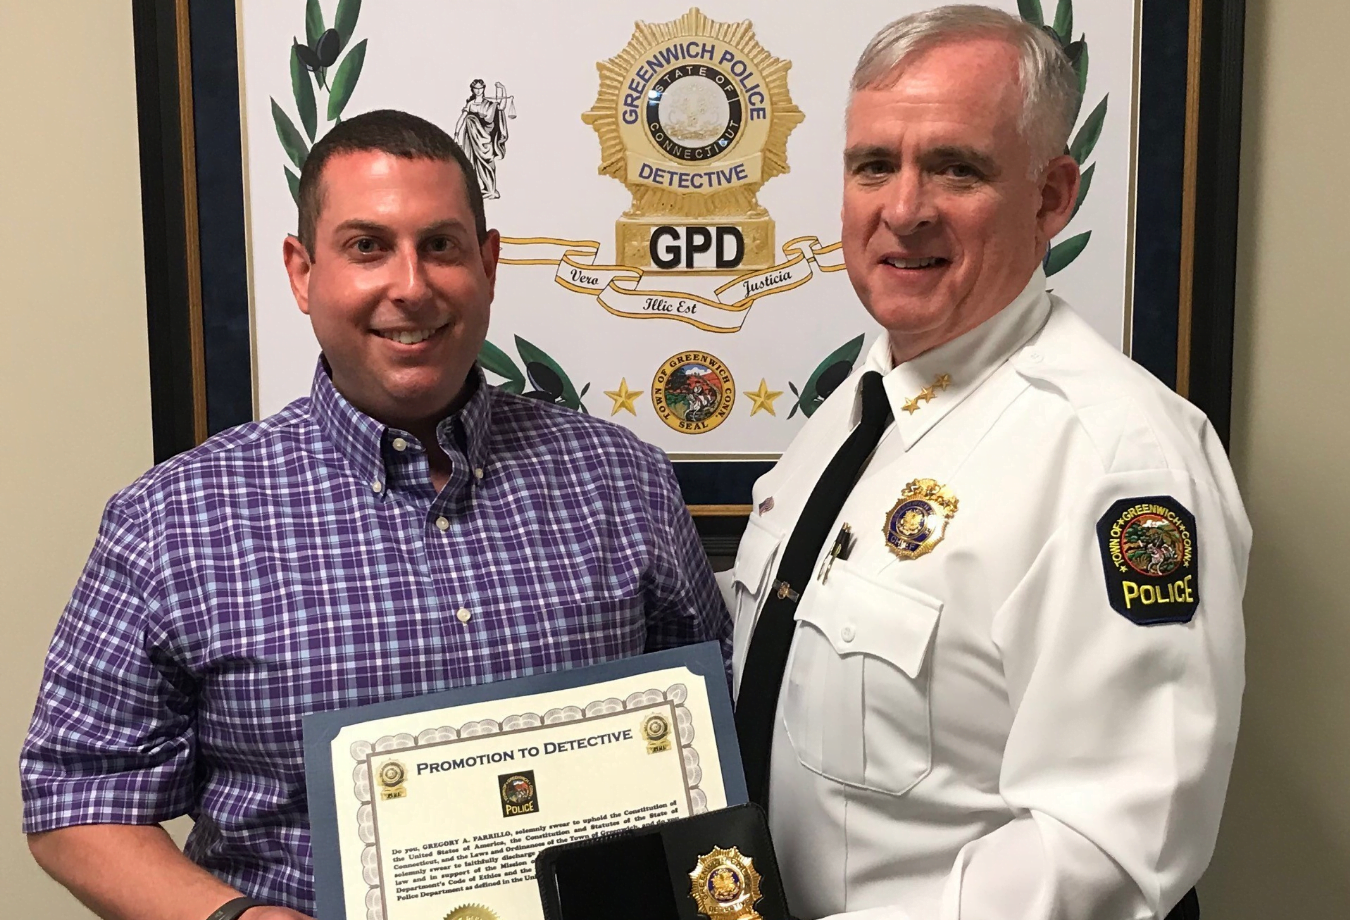 Newly promoted Detective Gregory Parrillo with Chief James Heavey. Photo courtesy Greenwich Police